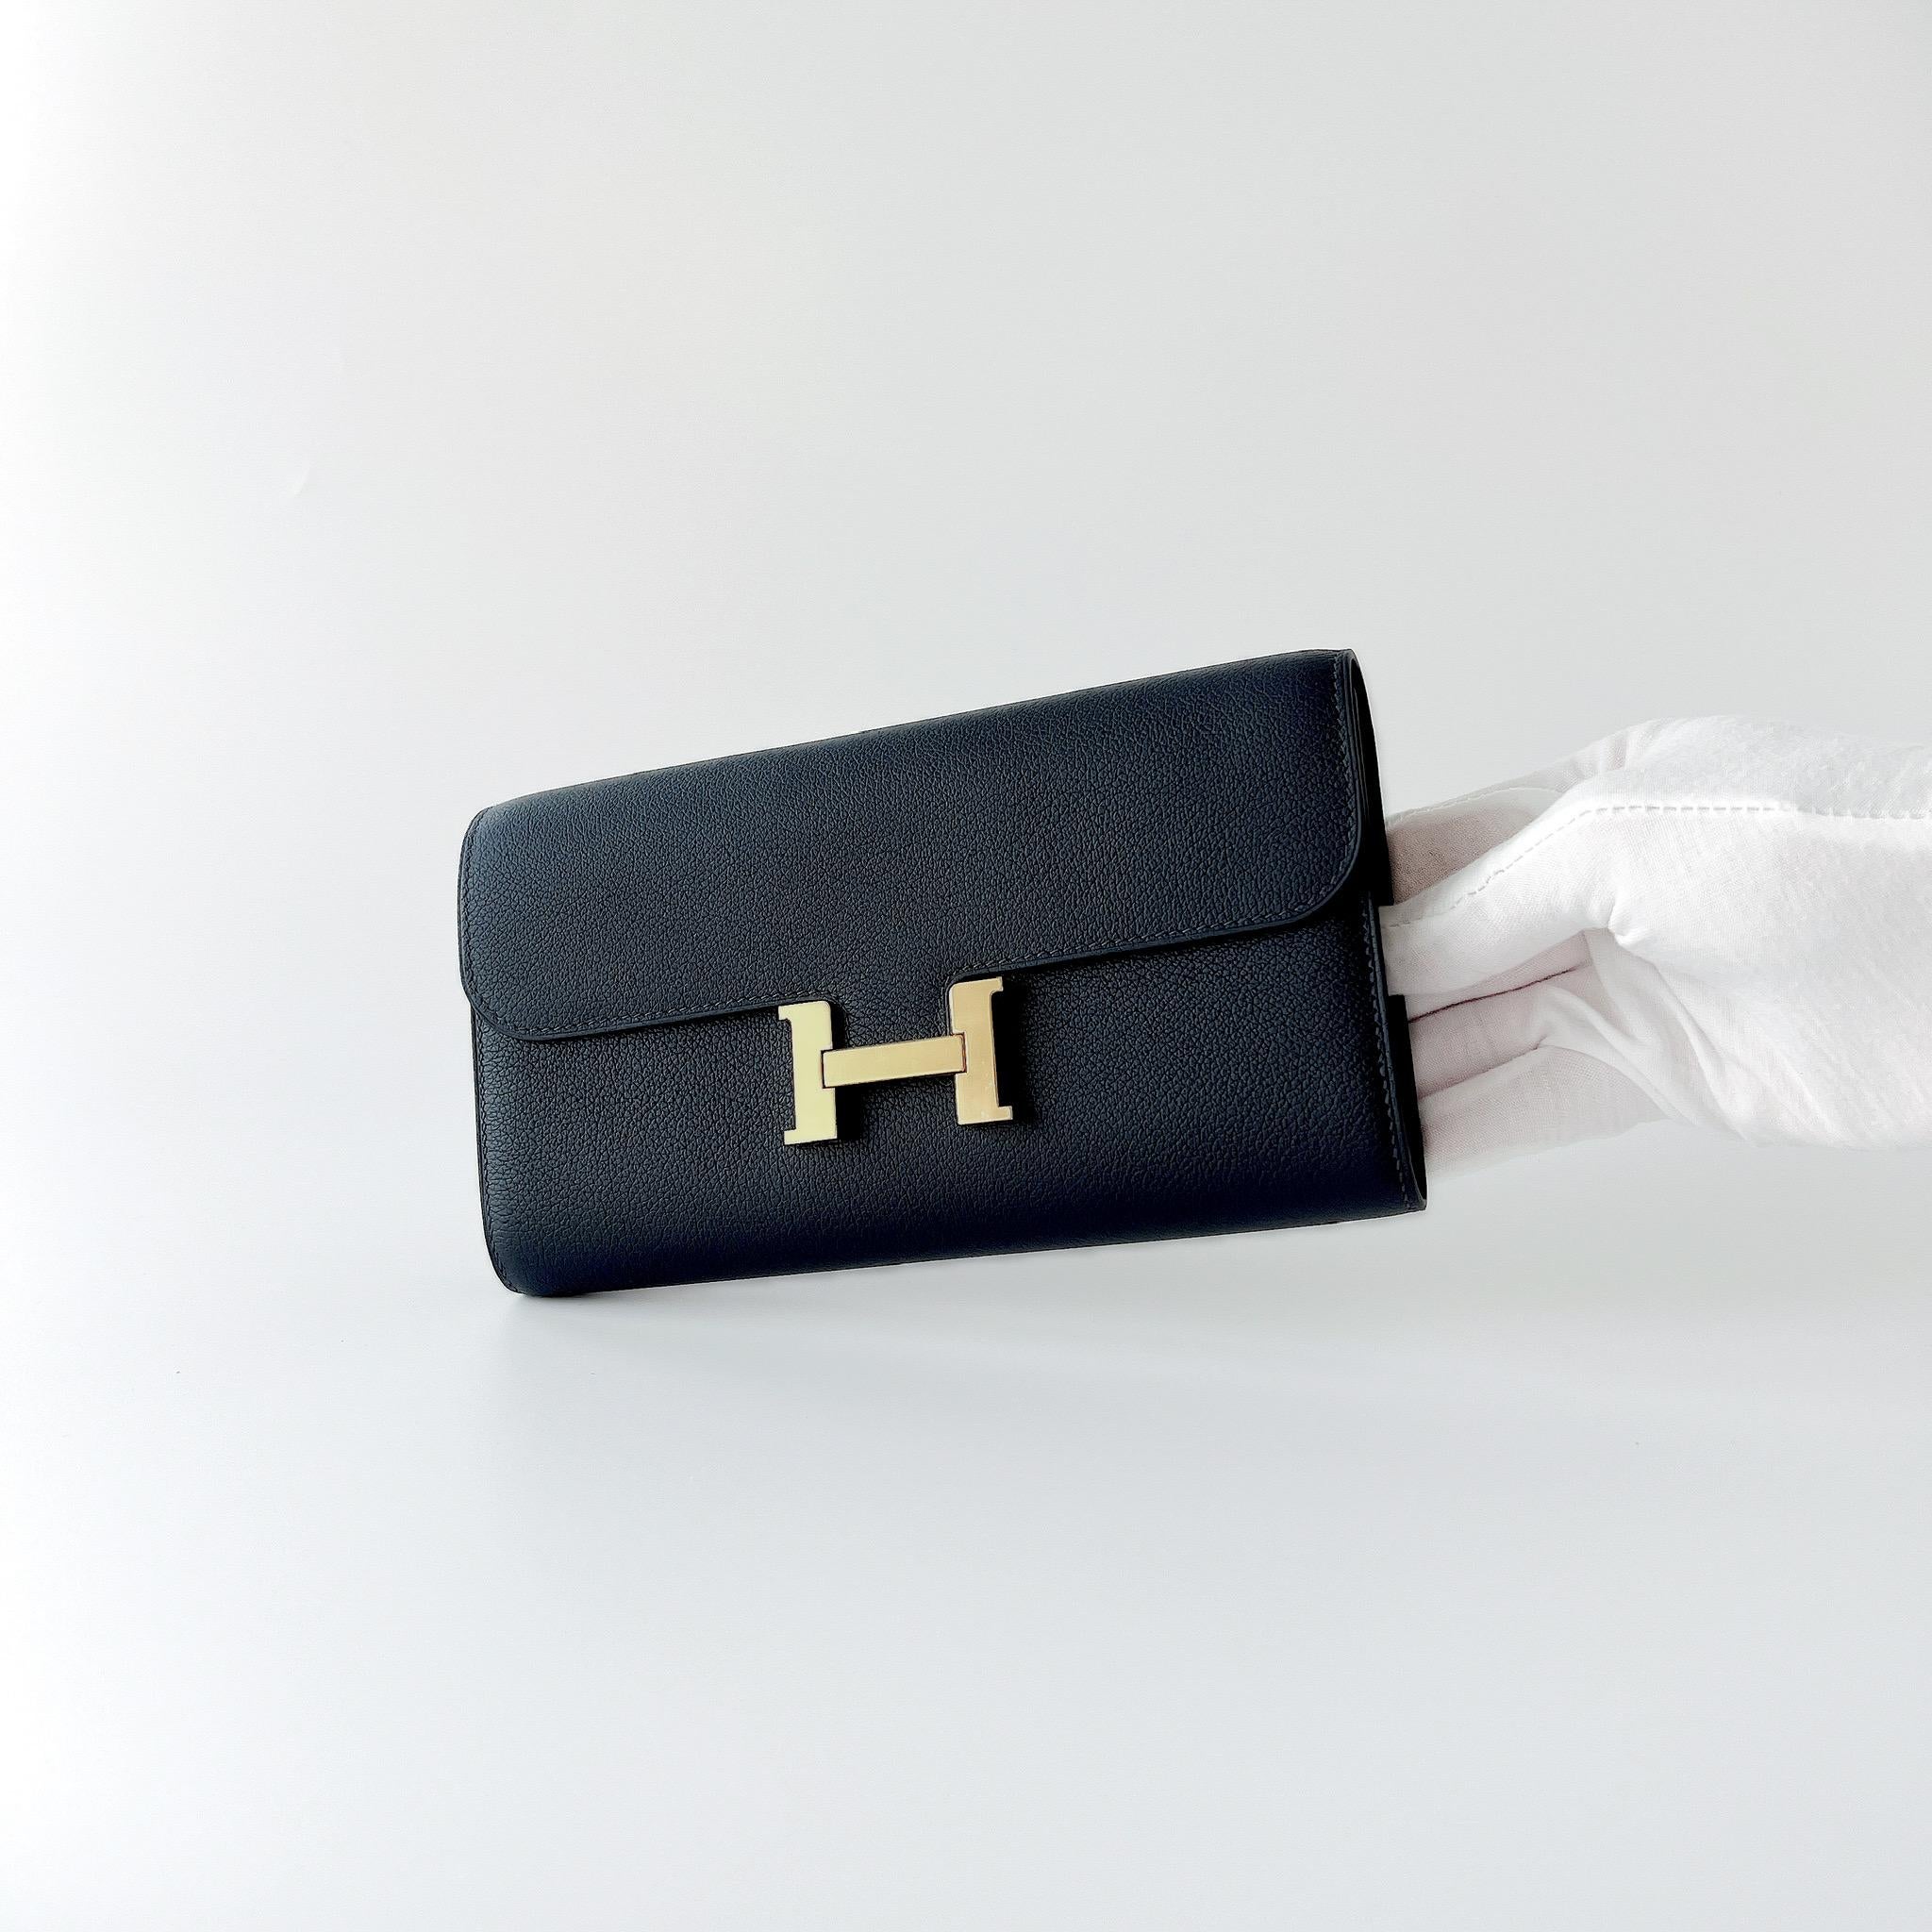 A beautiful Constance Long To Go Wallet In Bleu Nuit And Gold Hardware. This wallet has a strap making it perfect as a small bag. Inside has 4 credit card slots, 2 pockets, 1 zipped change purse and an exterior pocket. 

Brand: Hermès

Colour: Navy